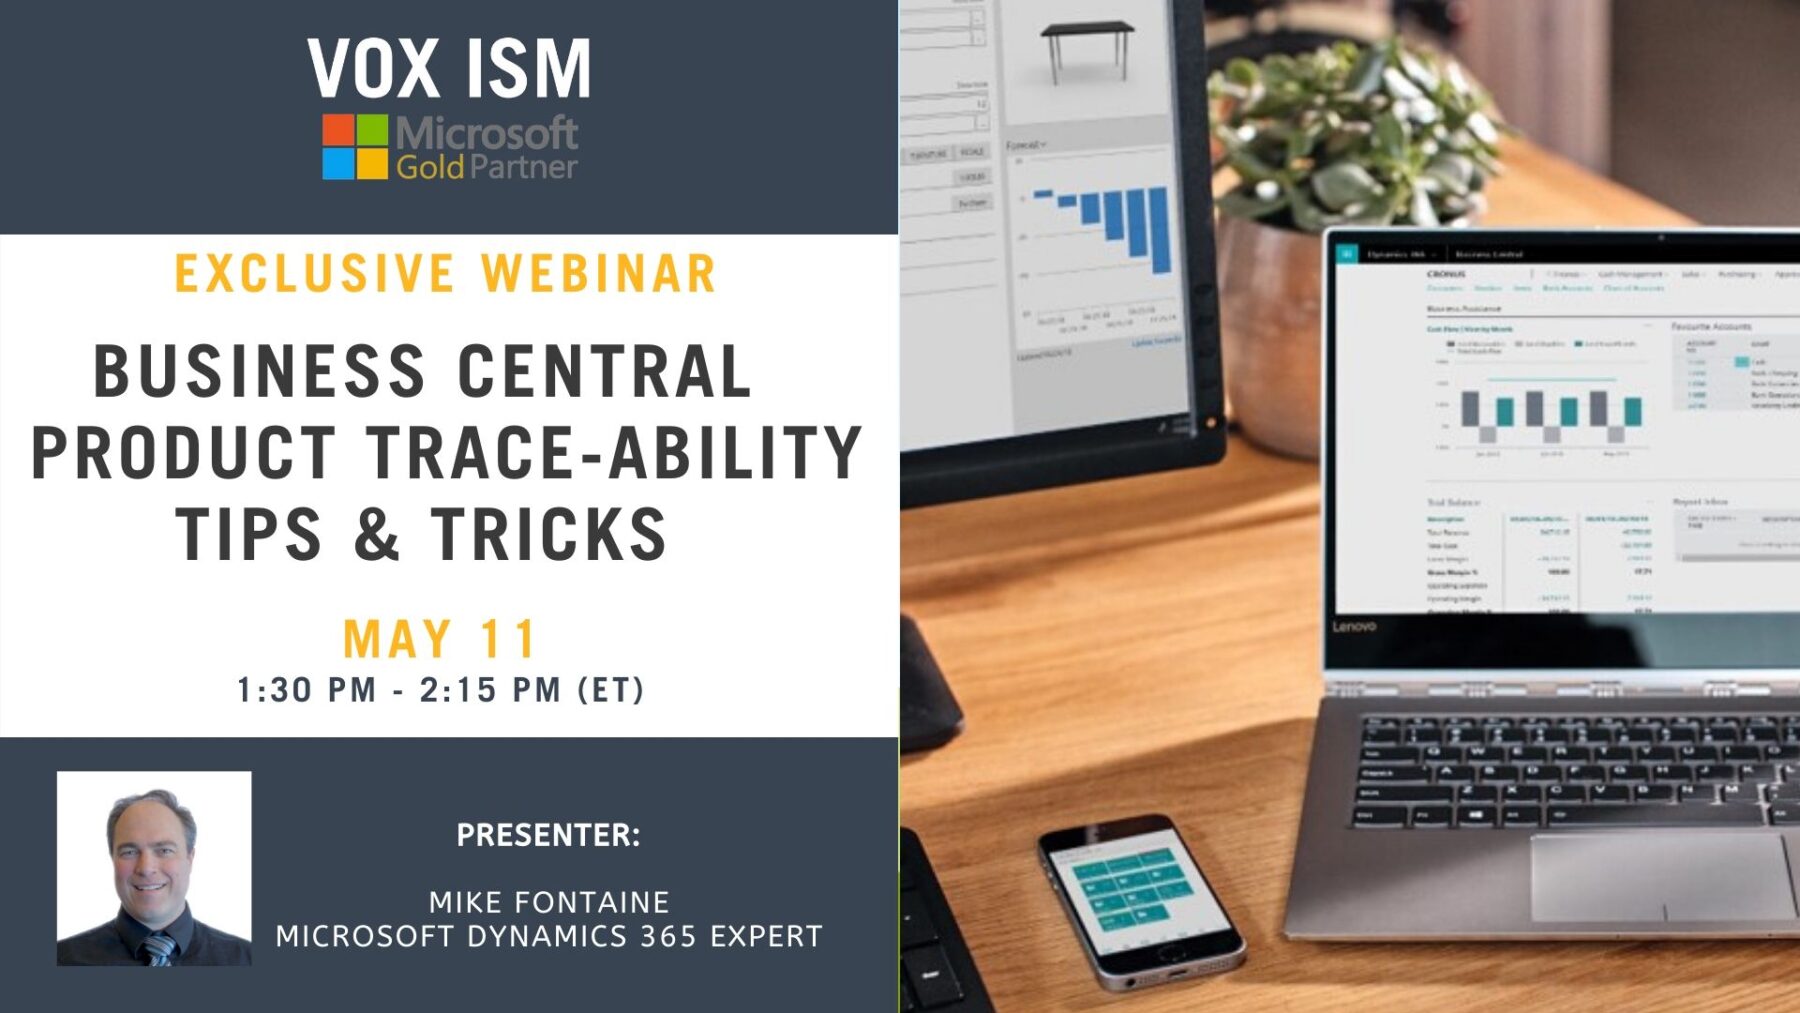 Business Central - Product Traceability Tips & Tricks - May 11 - Webinar VOX ISM